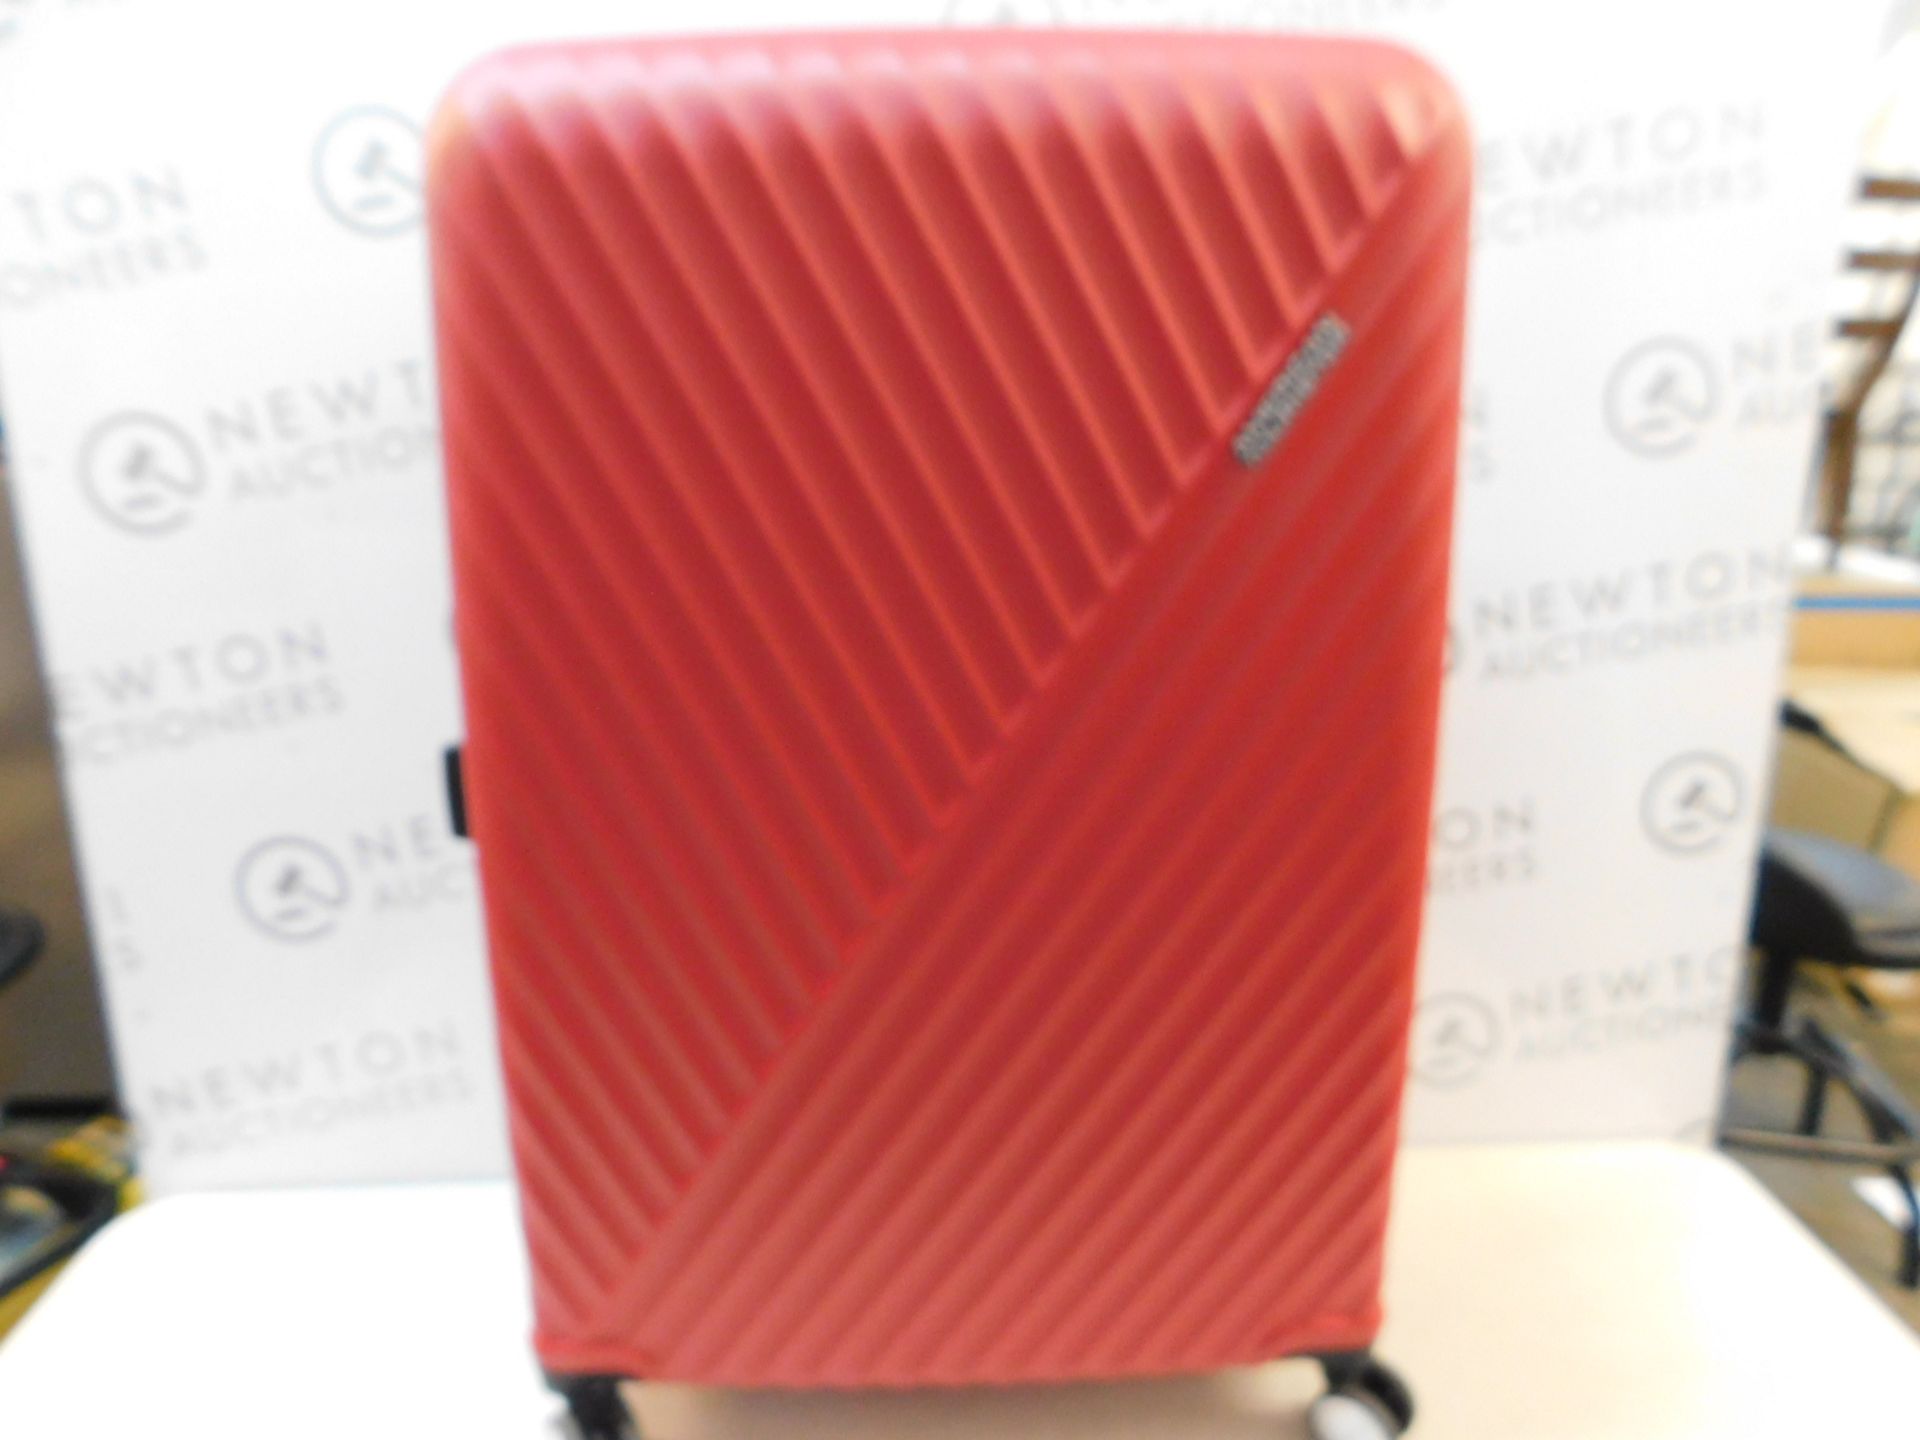 1 AMERICAN TOURISTER VISBY COMBI-LOCK DEEP RED HARDSIDE PROTECTION LARGE LUGGAGE CASE RRP £129.99